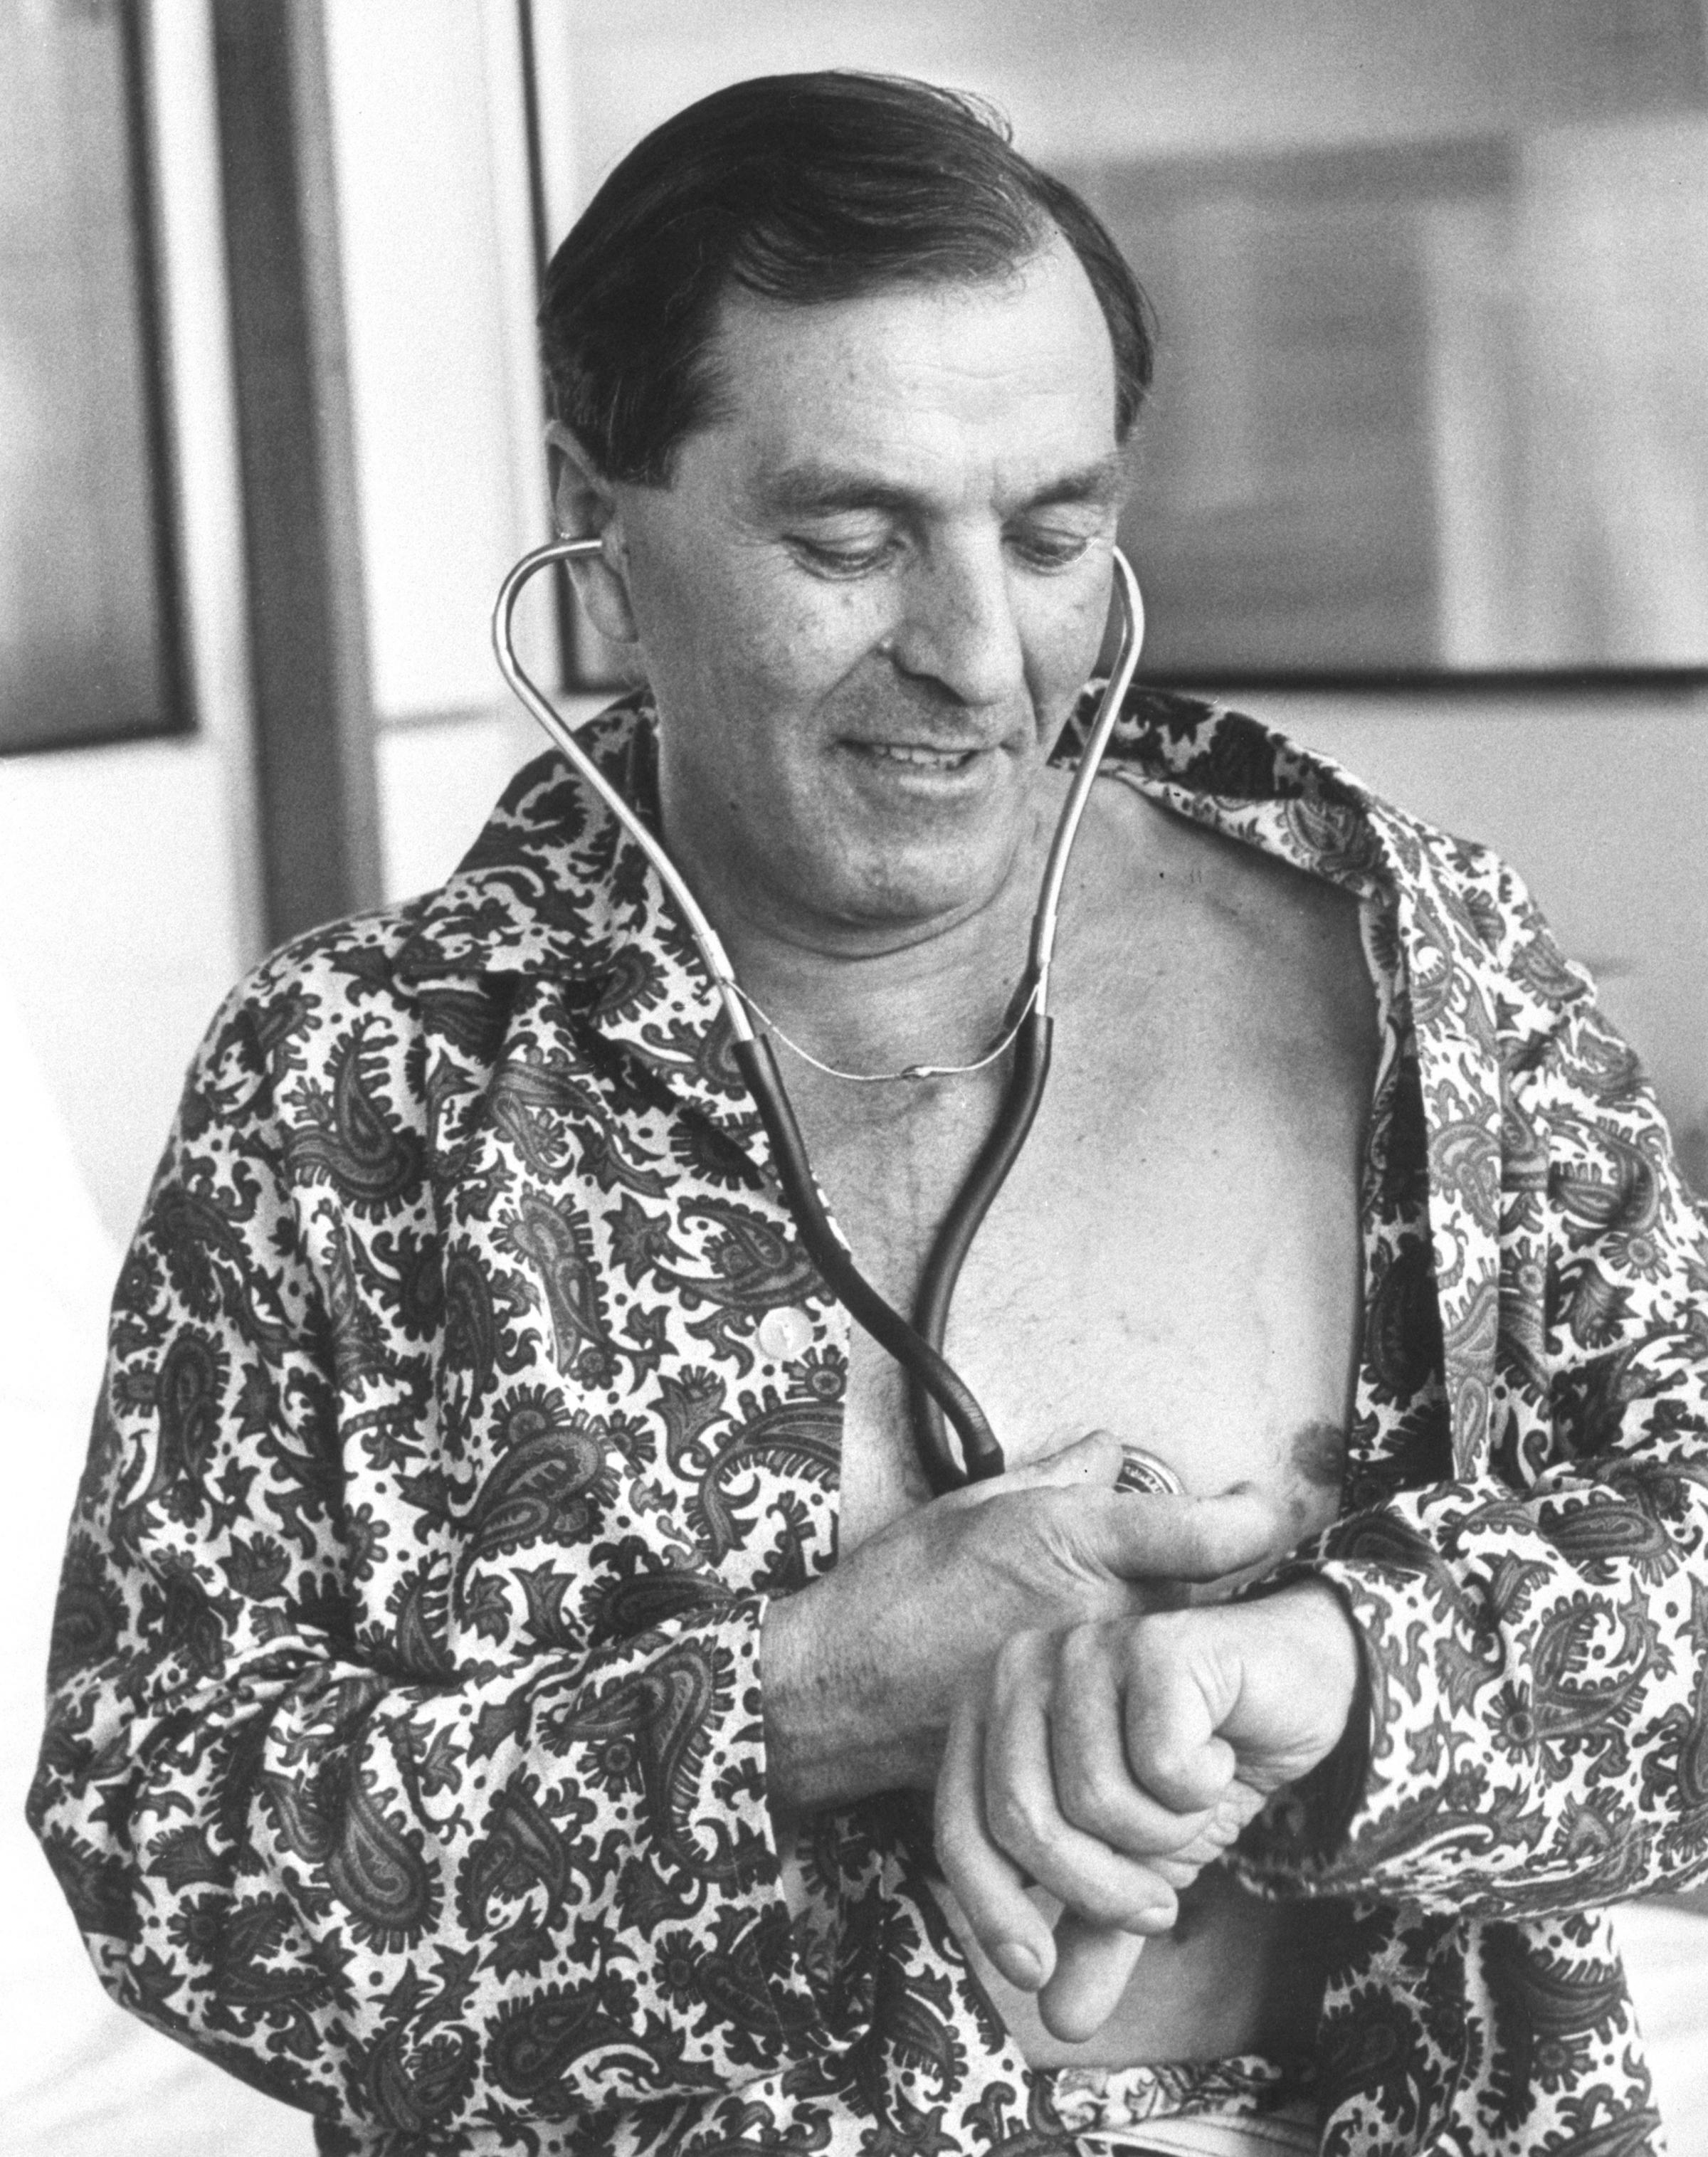 Looking for a beat - Frederick West checks his heart soon after undergoing the procedure in London